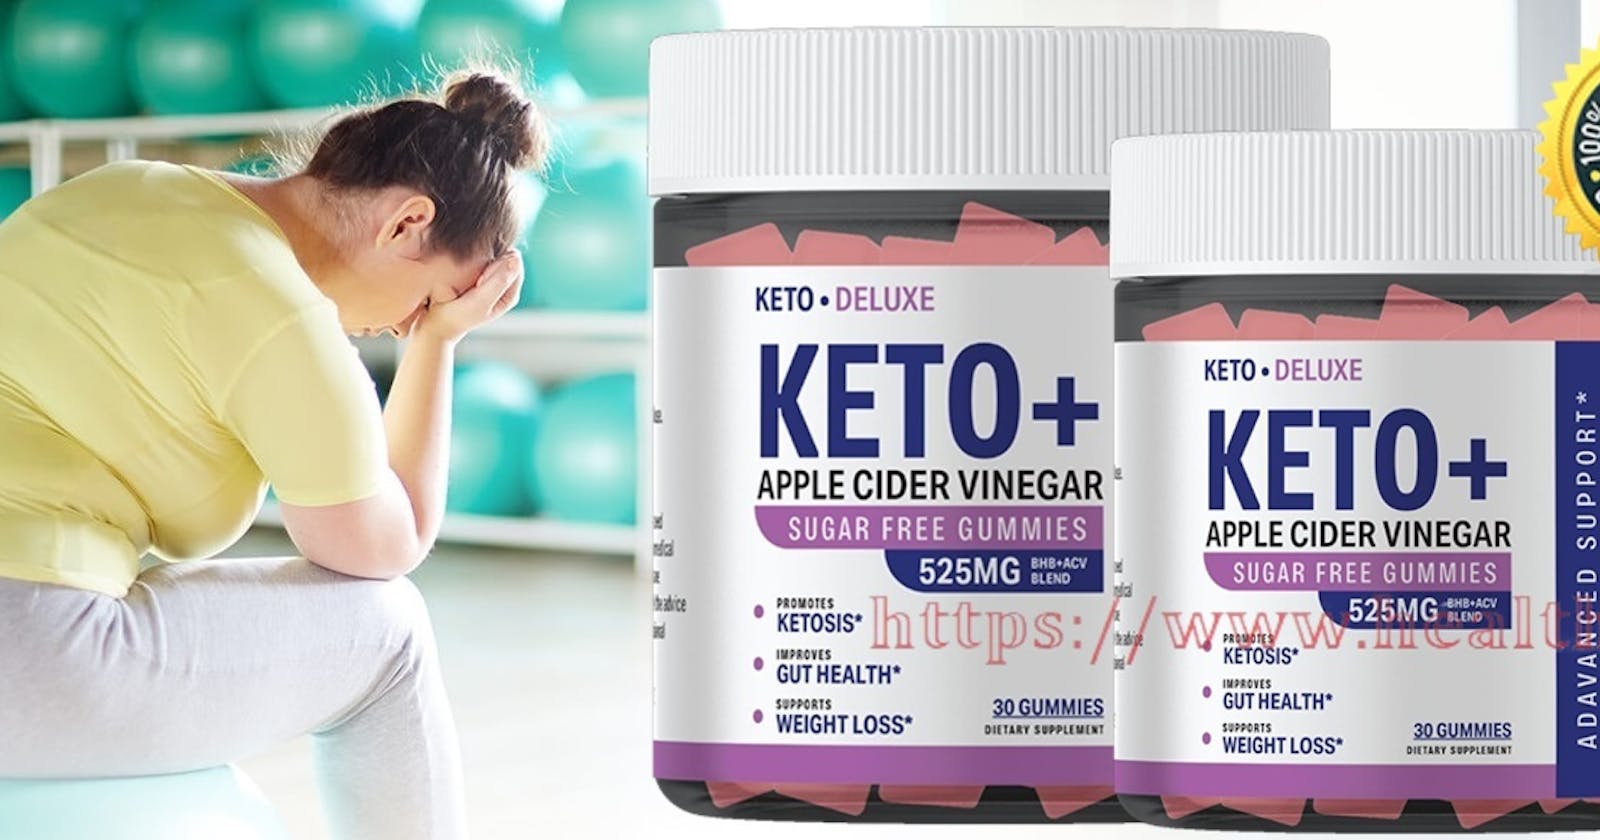 Deluxe Keto ACV Gummies {Clinically Proven} Reduce Appetite & Cravings Helpful For Weight And Fat Loss(REAL OR HOAX)